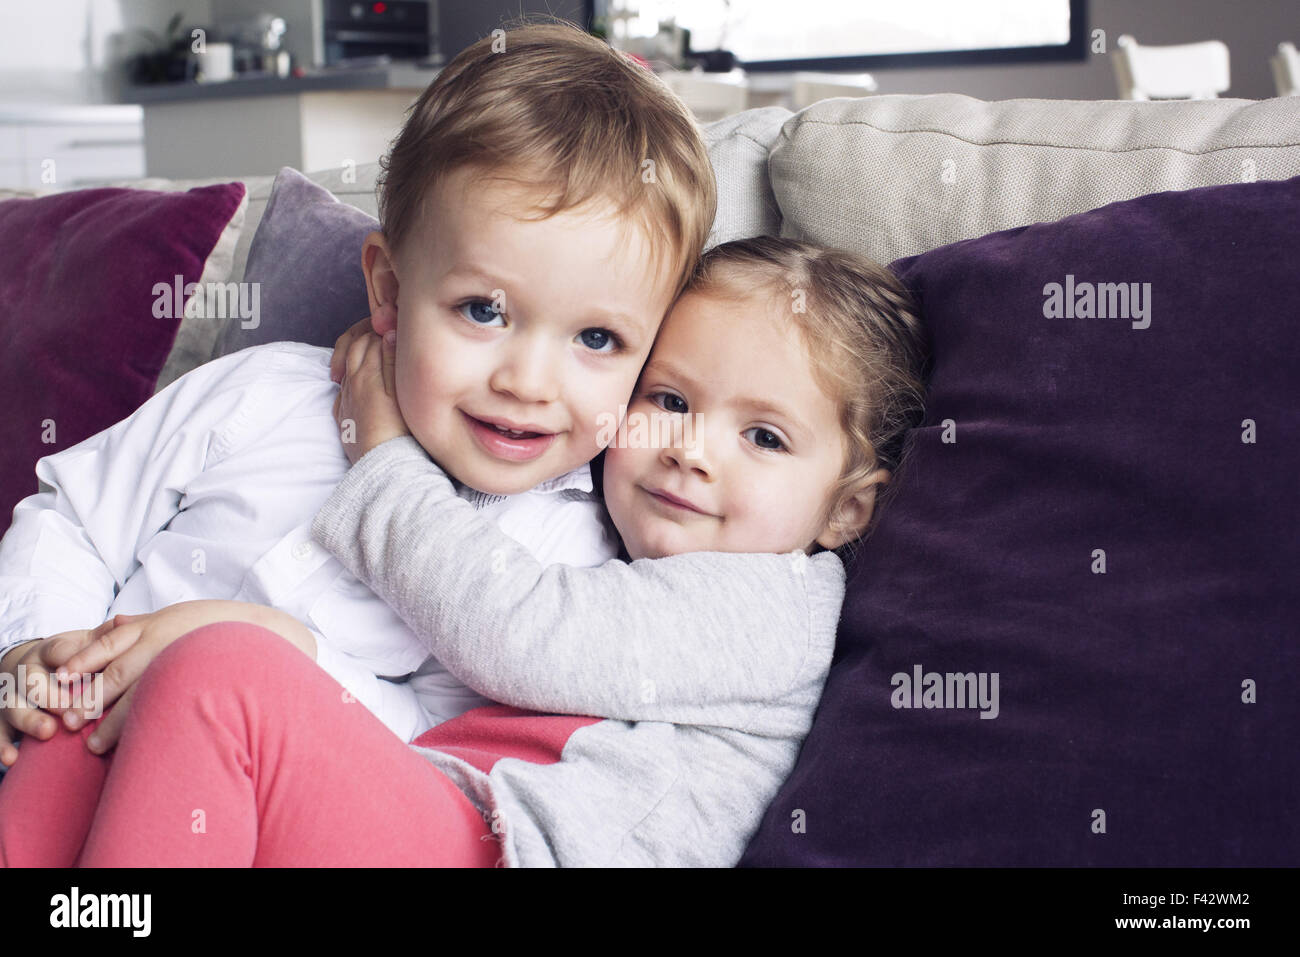 Young siblings embracing, portrait Stock Photo